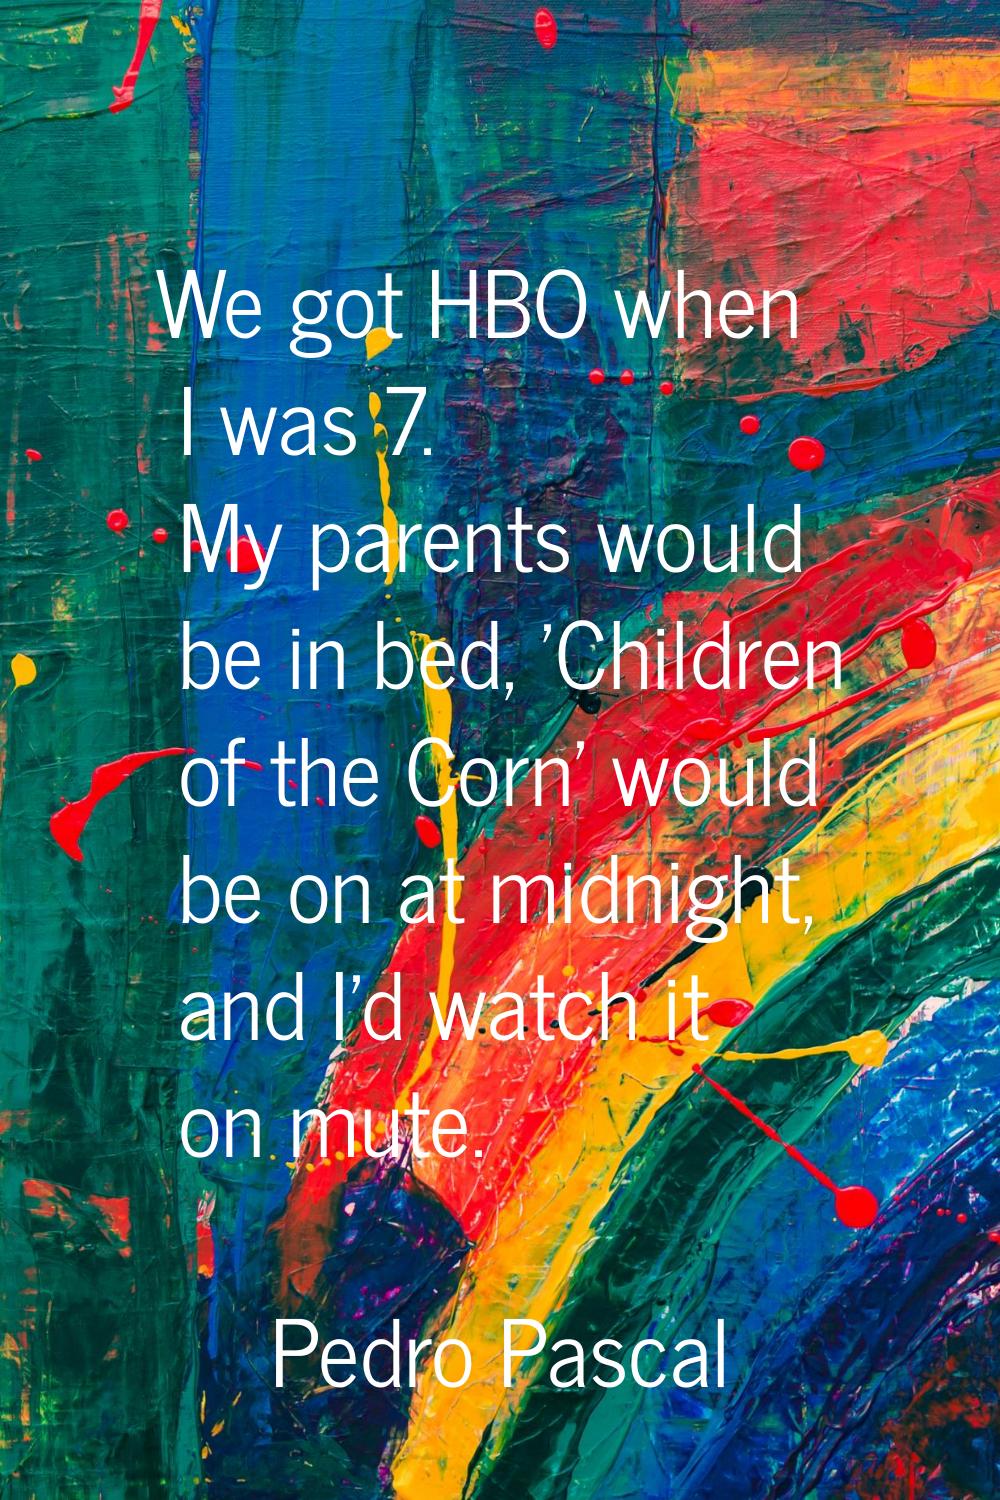 We got HBO when I was 7. My parents would be in bed, 'Children of the Corn' would be on at midnight